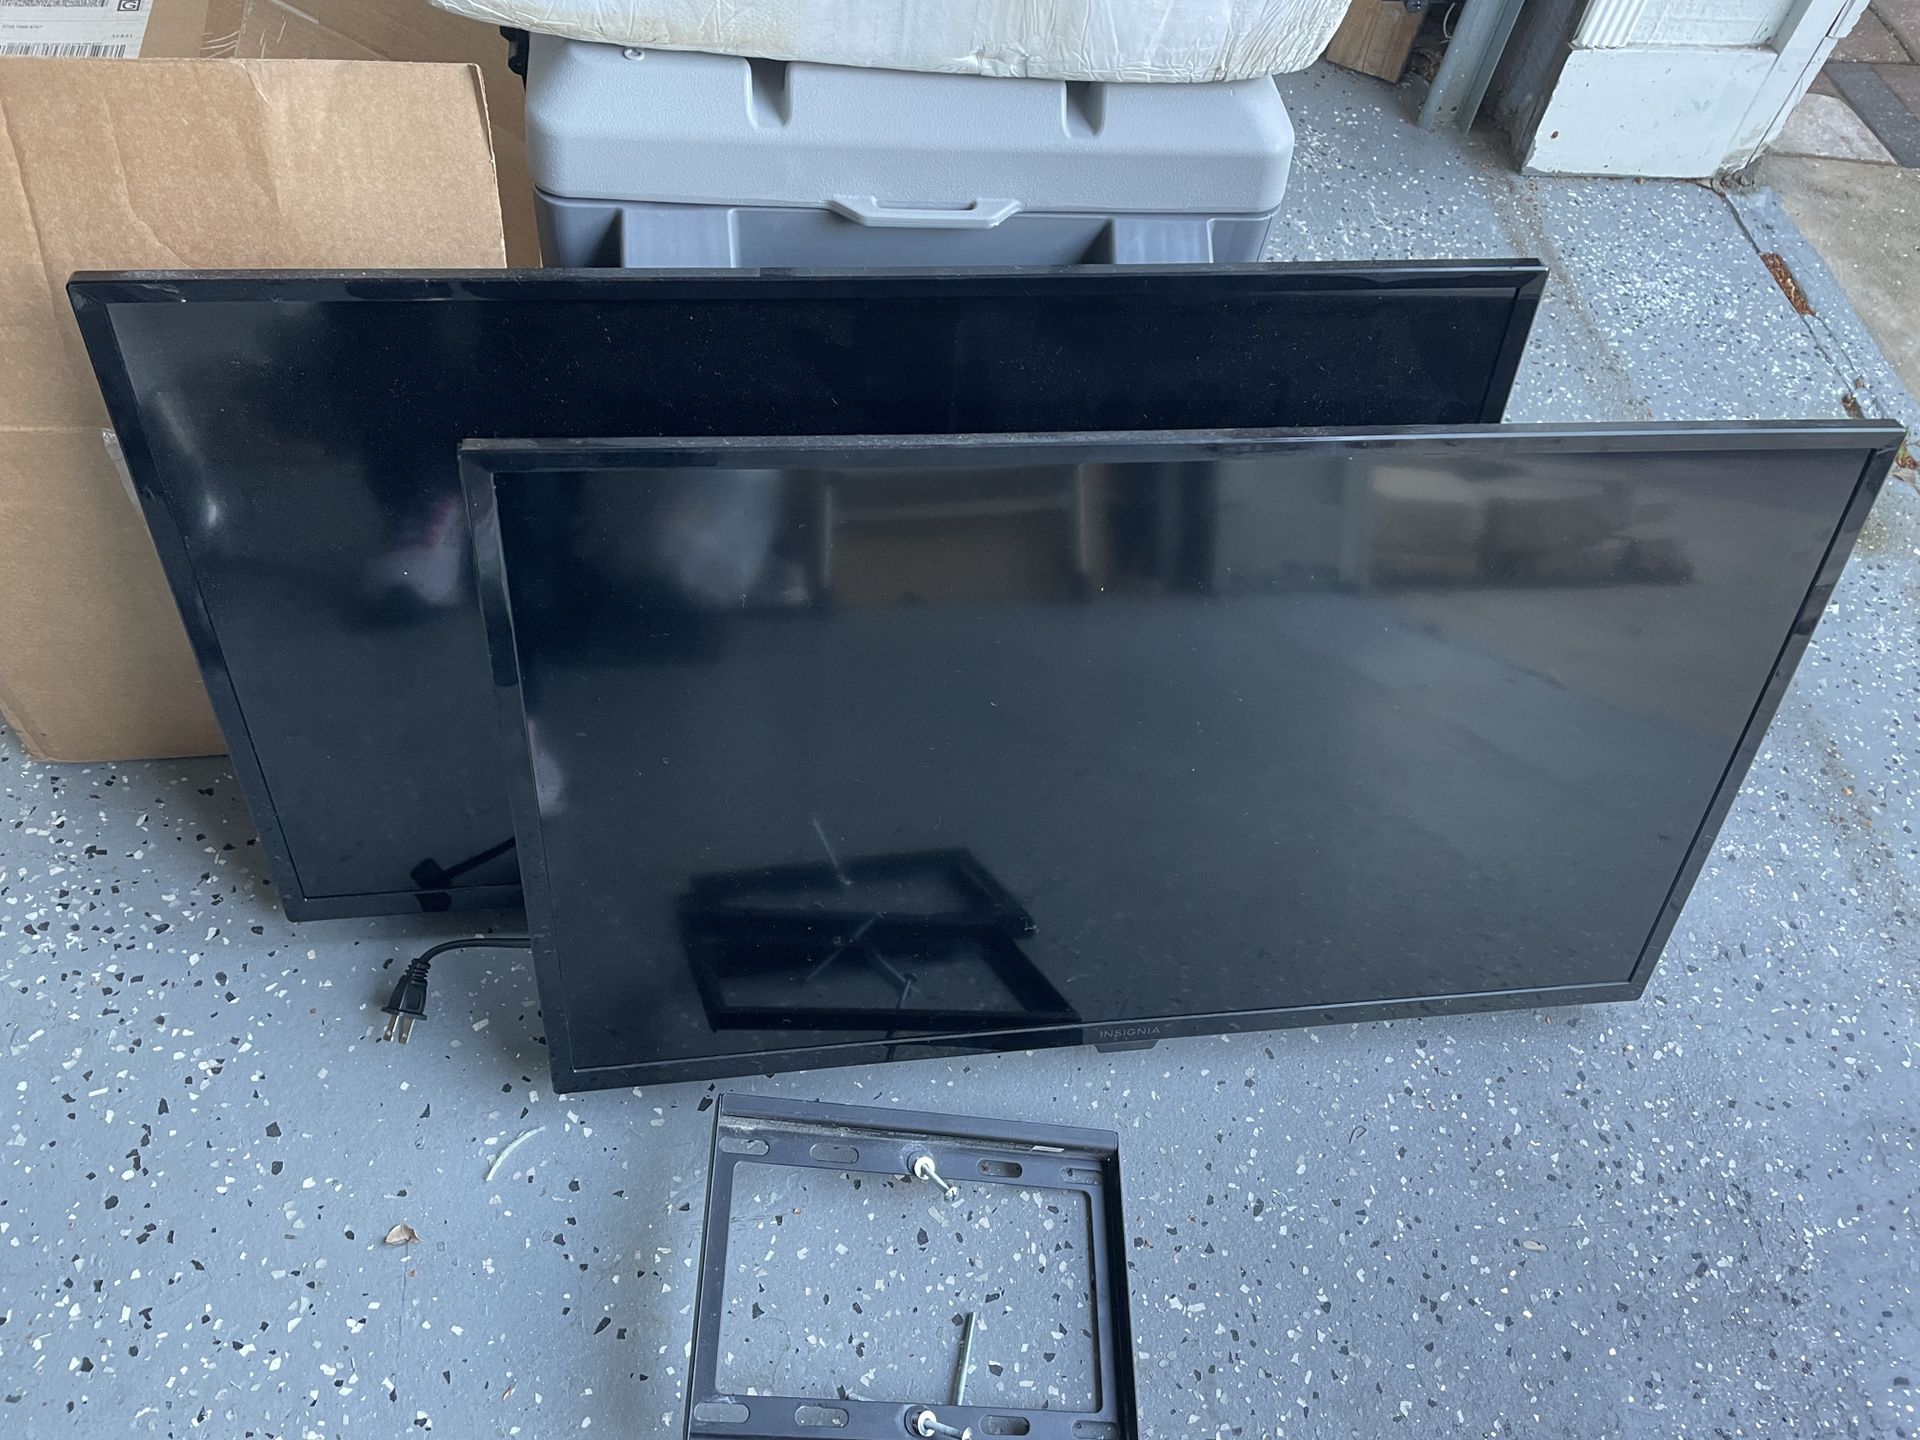 32” Insignia TV’s With Wall Mouting Hardwares Ready